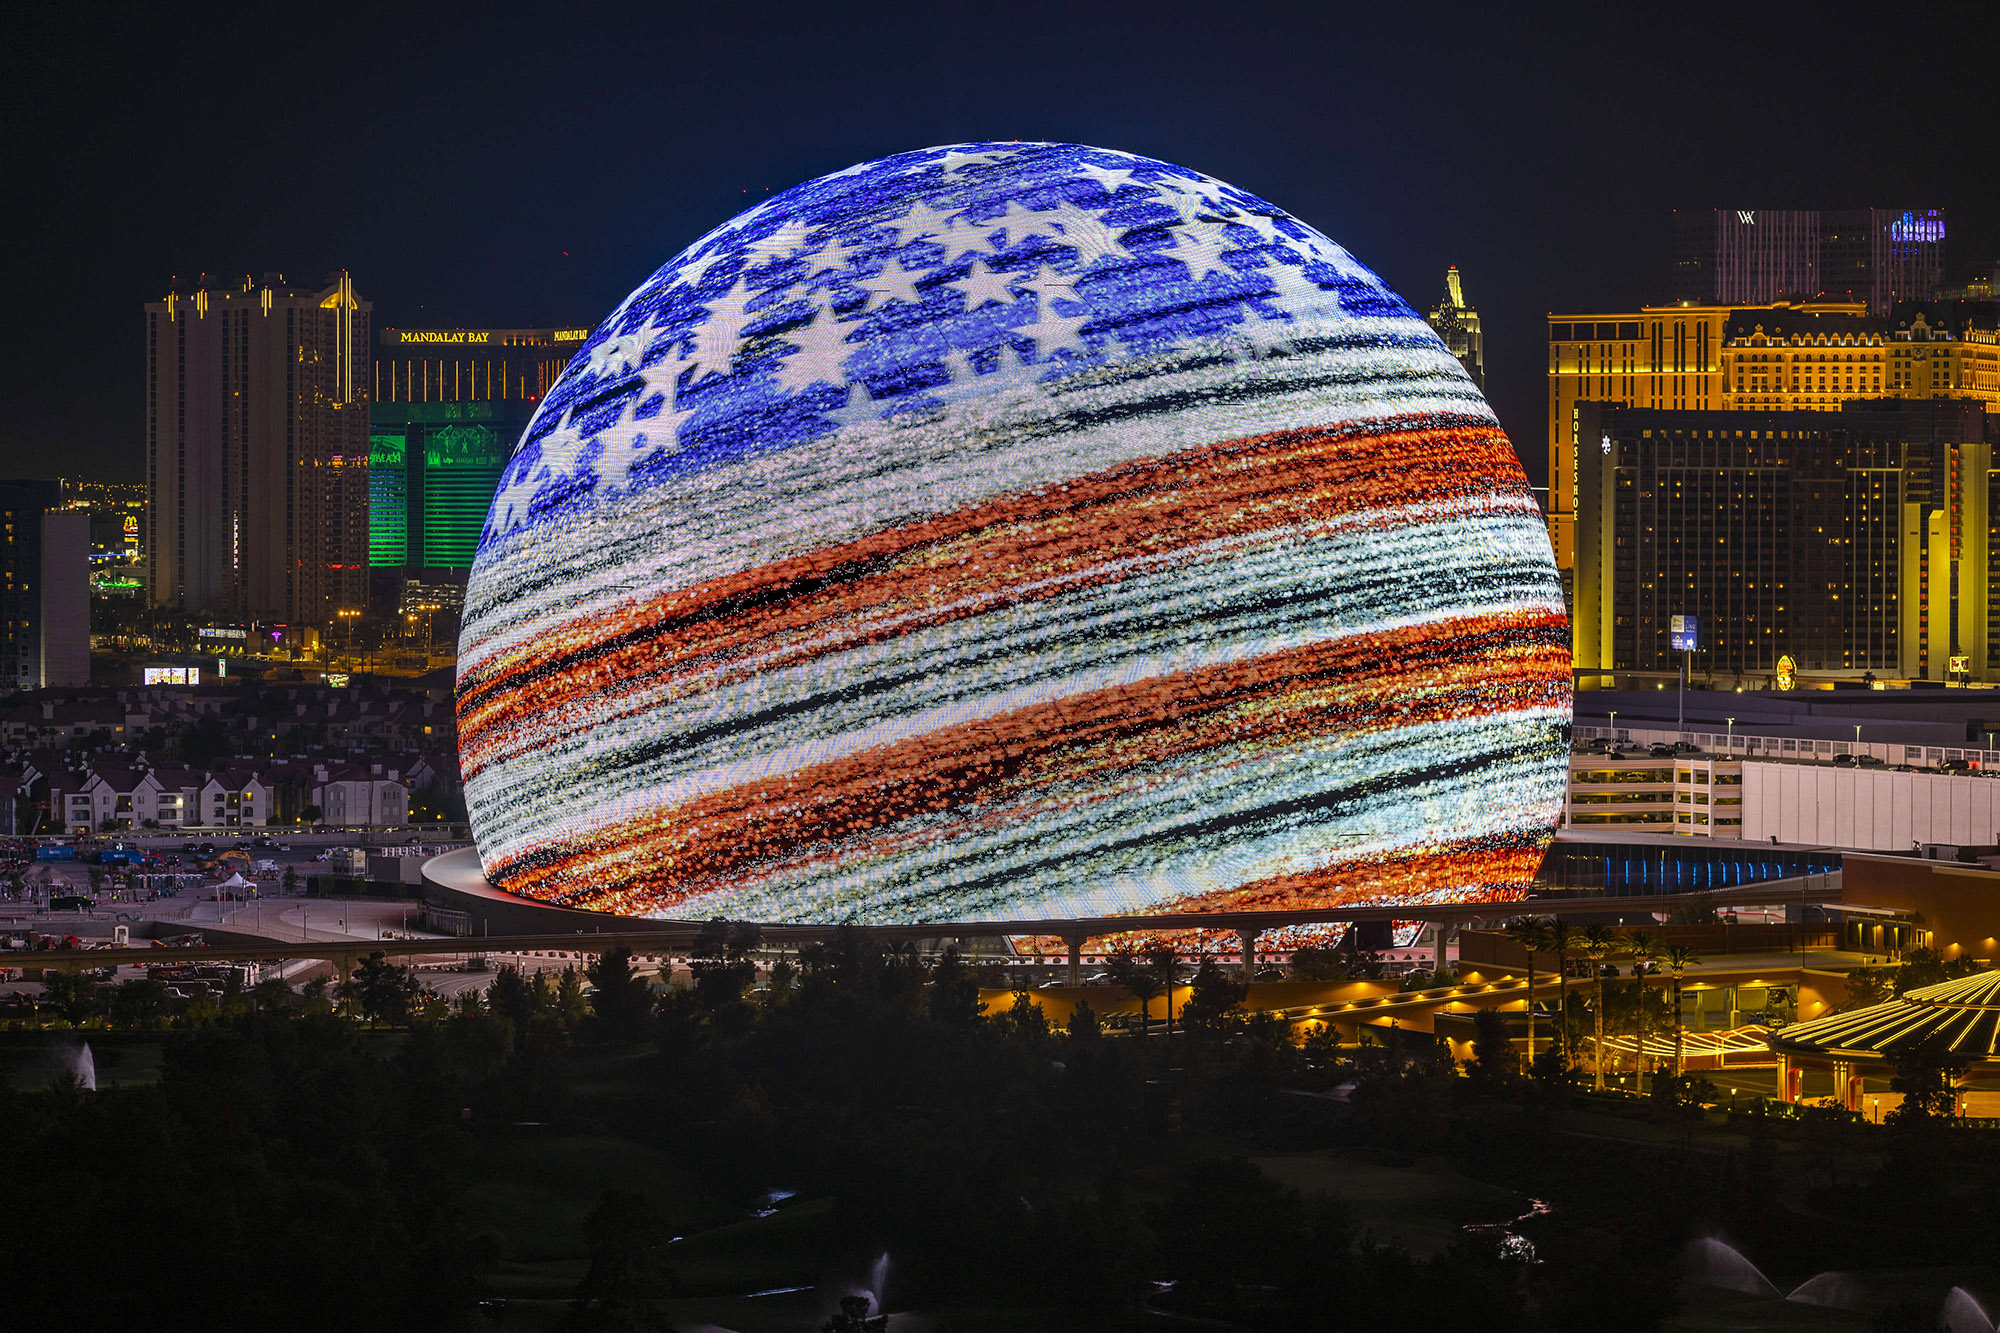 MSG Sphere Las Vegas unveiled for Fourth of July